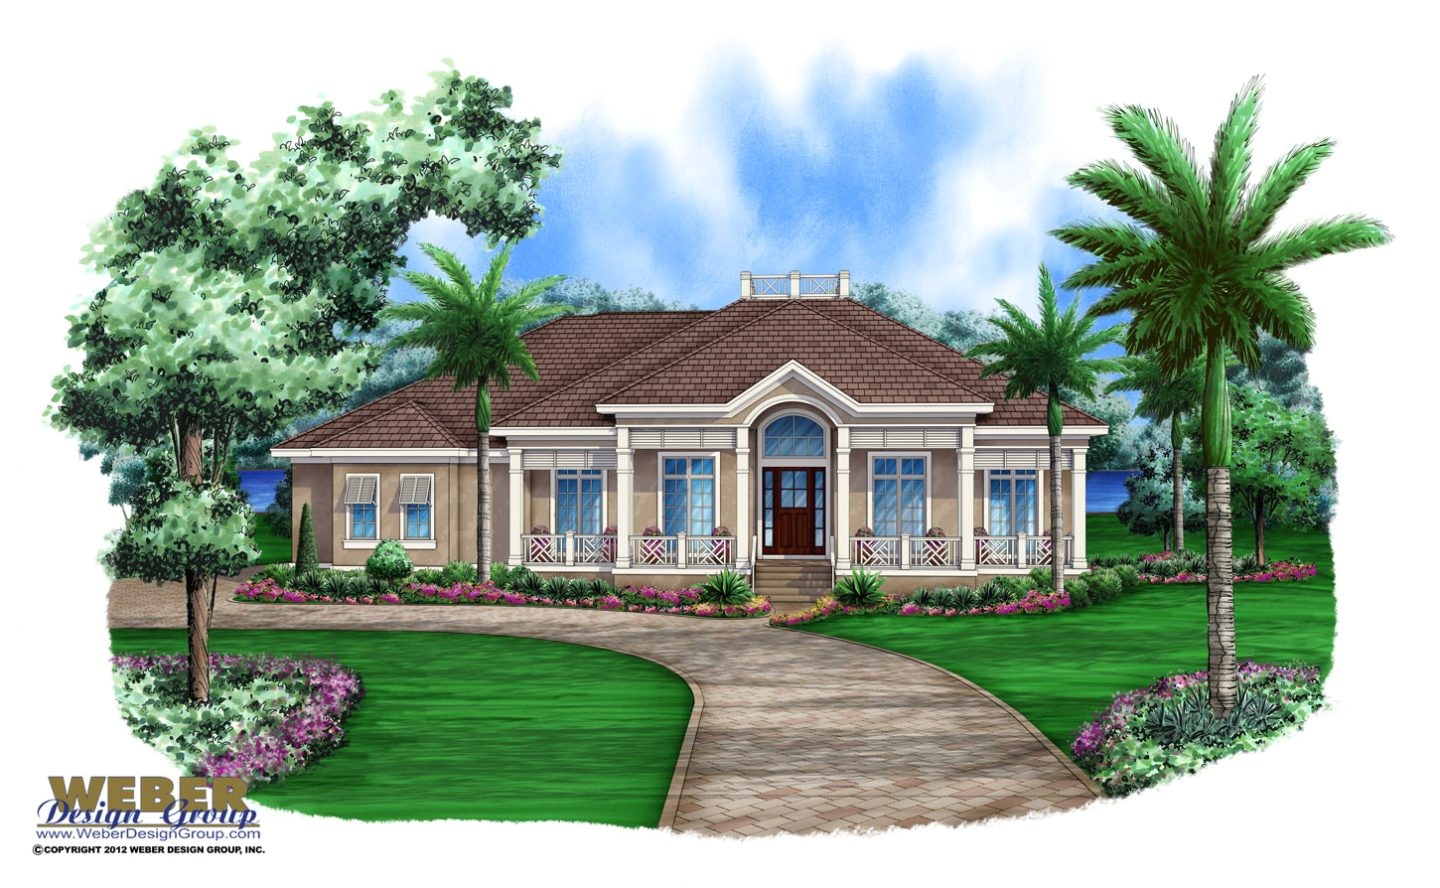 Small Florida Home Plans Small Florida House Plans 28 Images Small A Frame